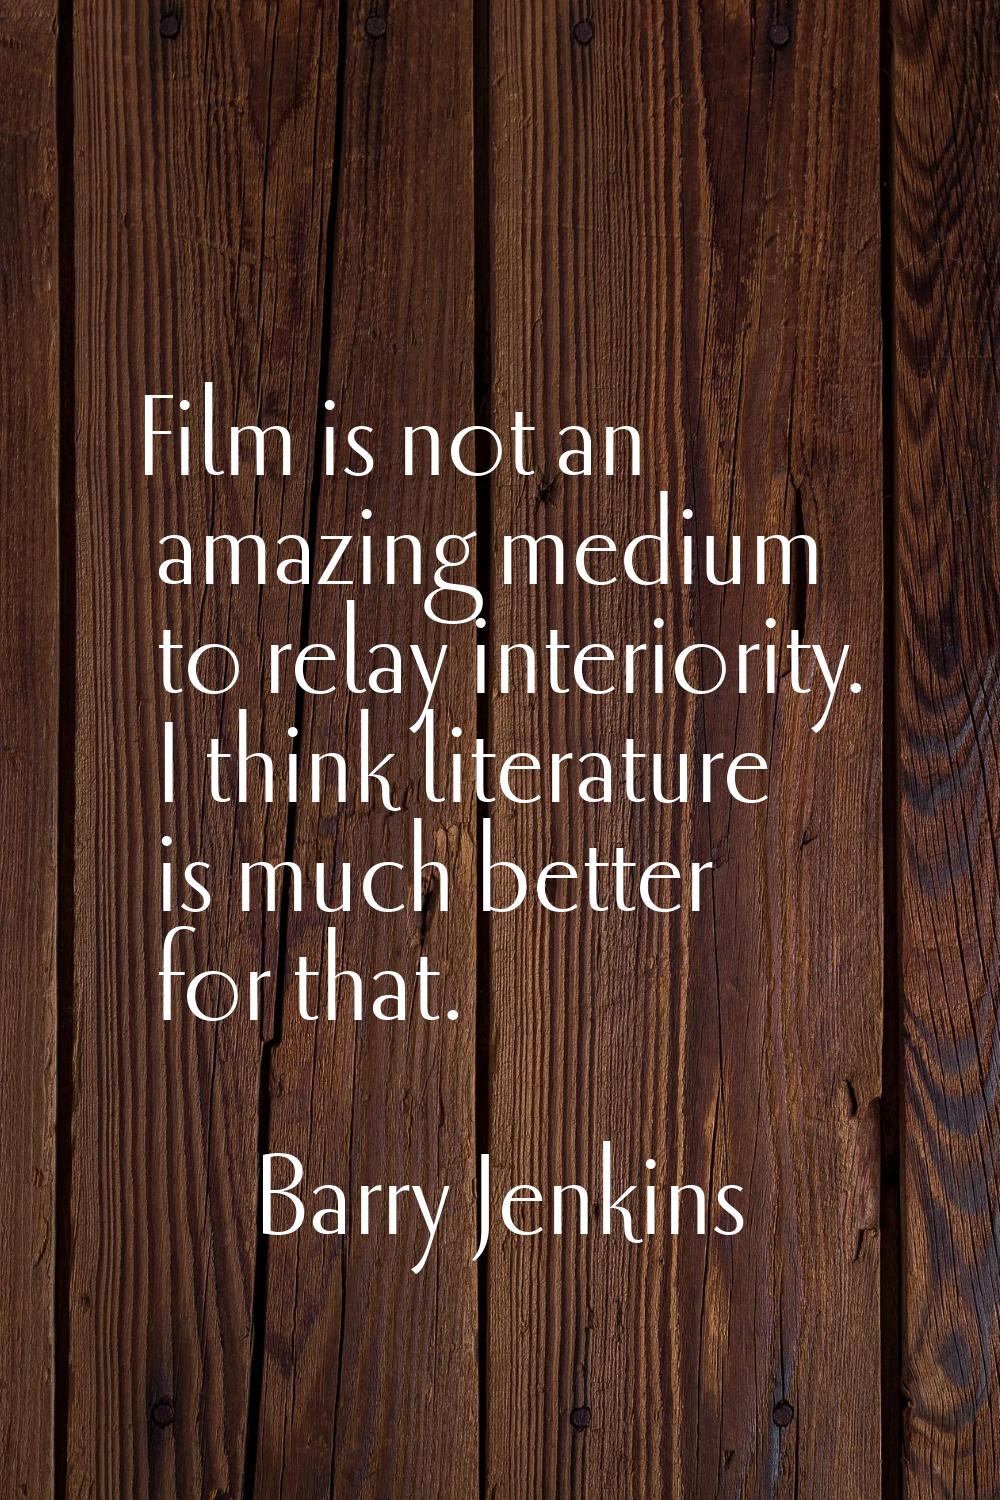 Film is not an amazing medium to relay interiority. I think literature is much better for that.